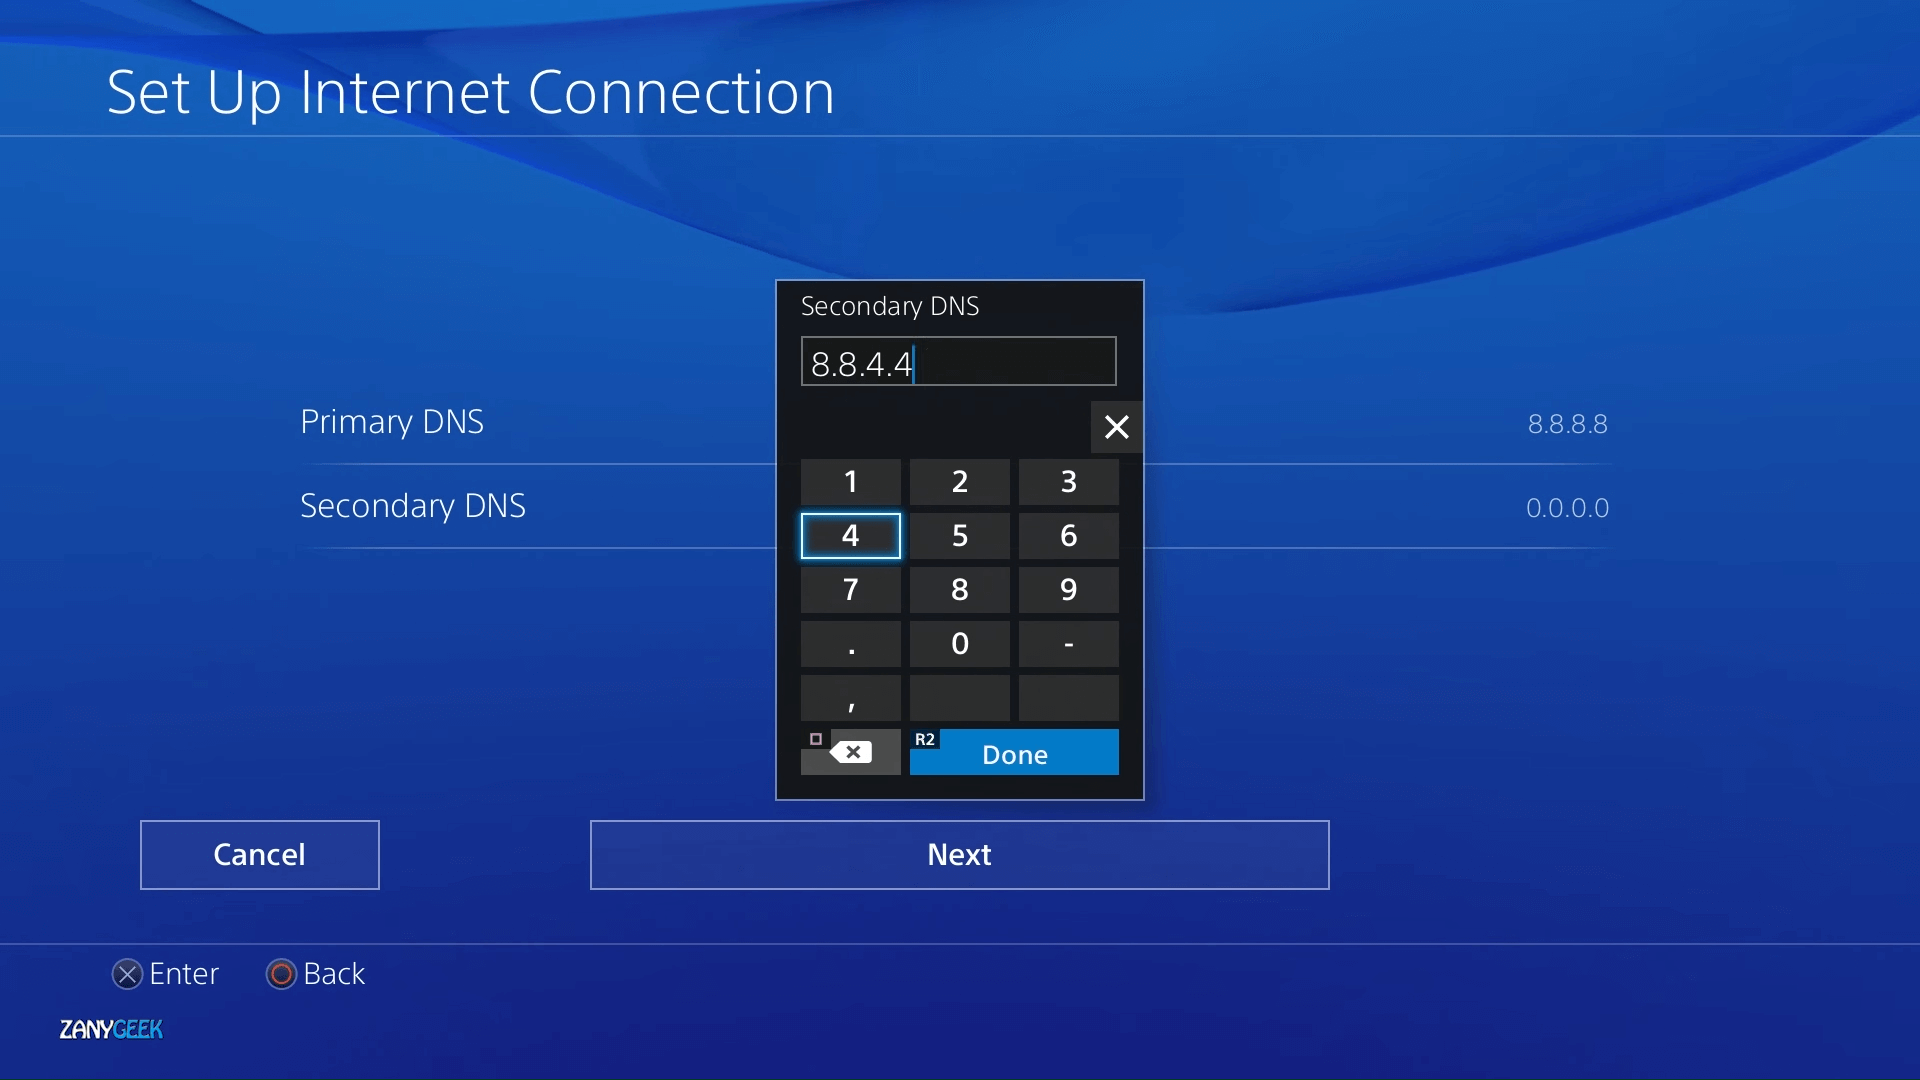 Primary and Secondary DNS settings ps4 error ce-37813-2, ws-37431-8